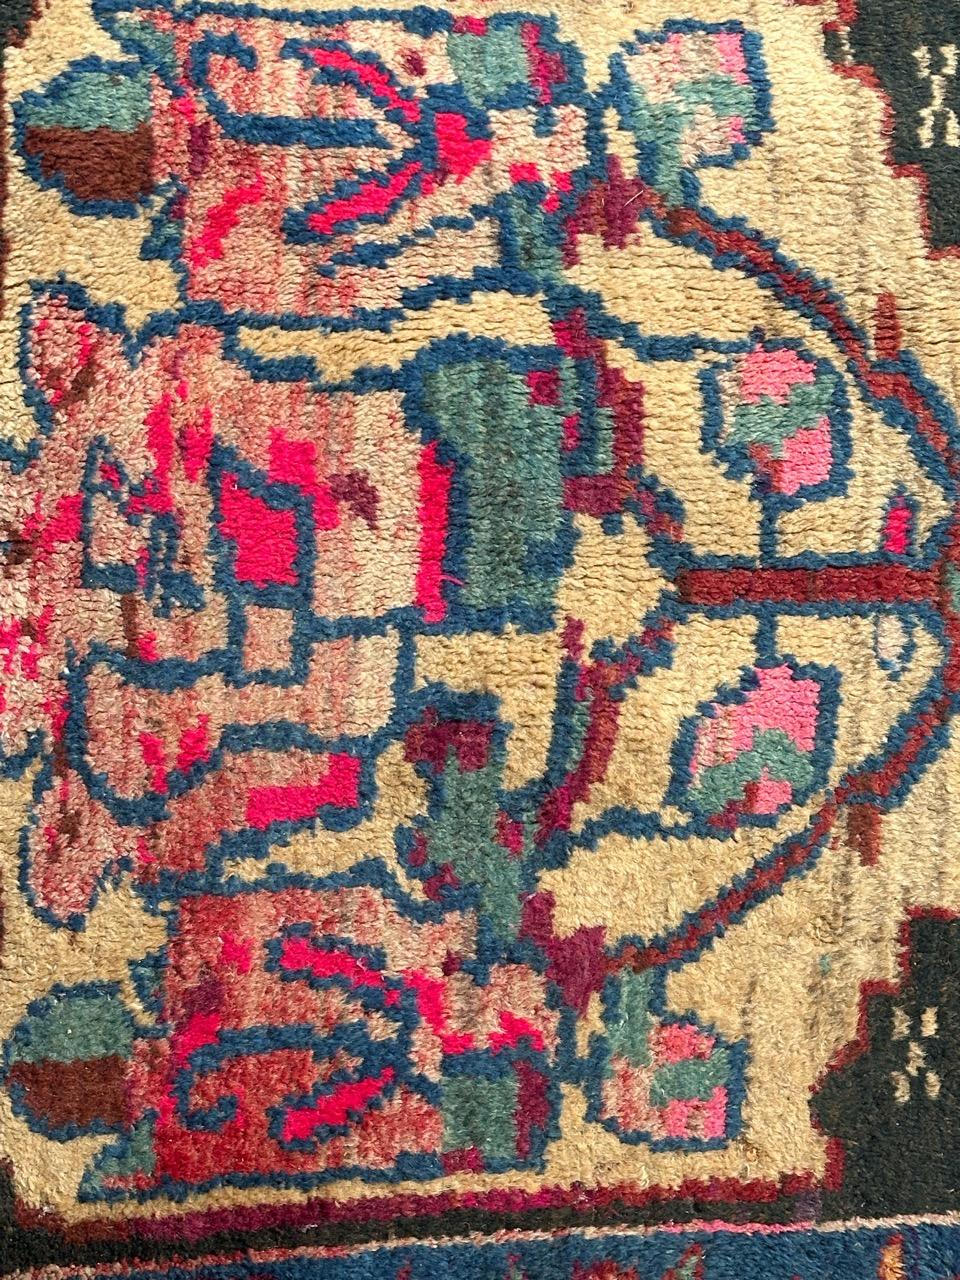 Pretty vintage tribal rug with nice floral stylized floral design and beautiful colours with yellow, green, blue, pink and red, entirely hand knotted with wool on cotton foundation.

✨✨✨
